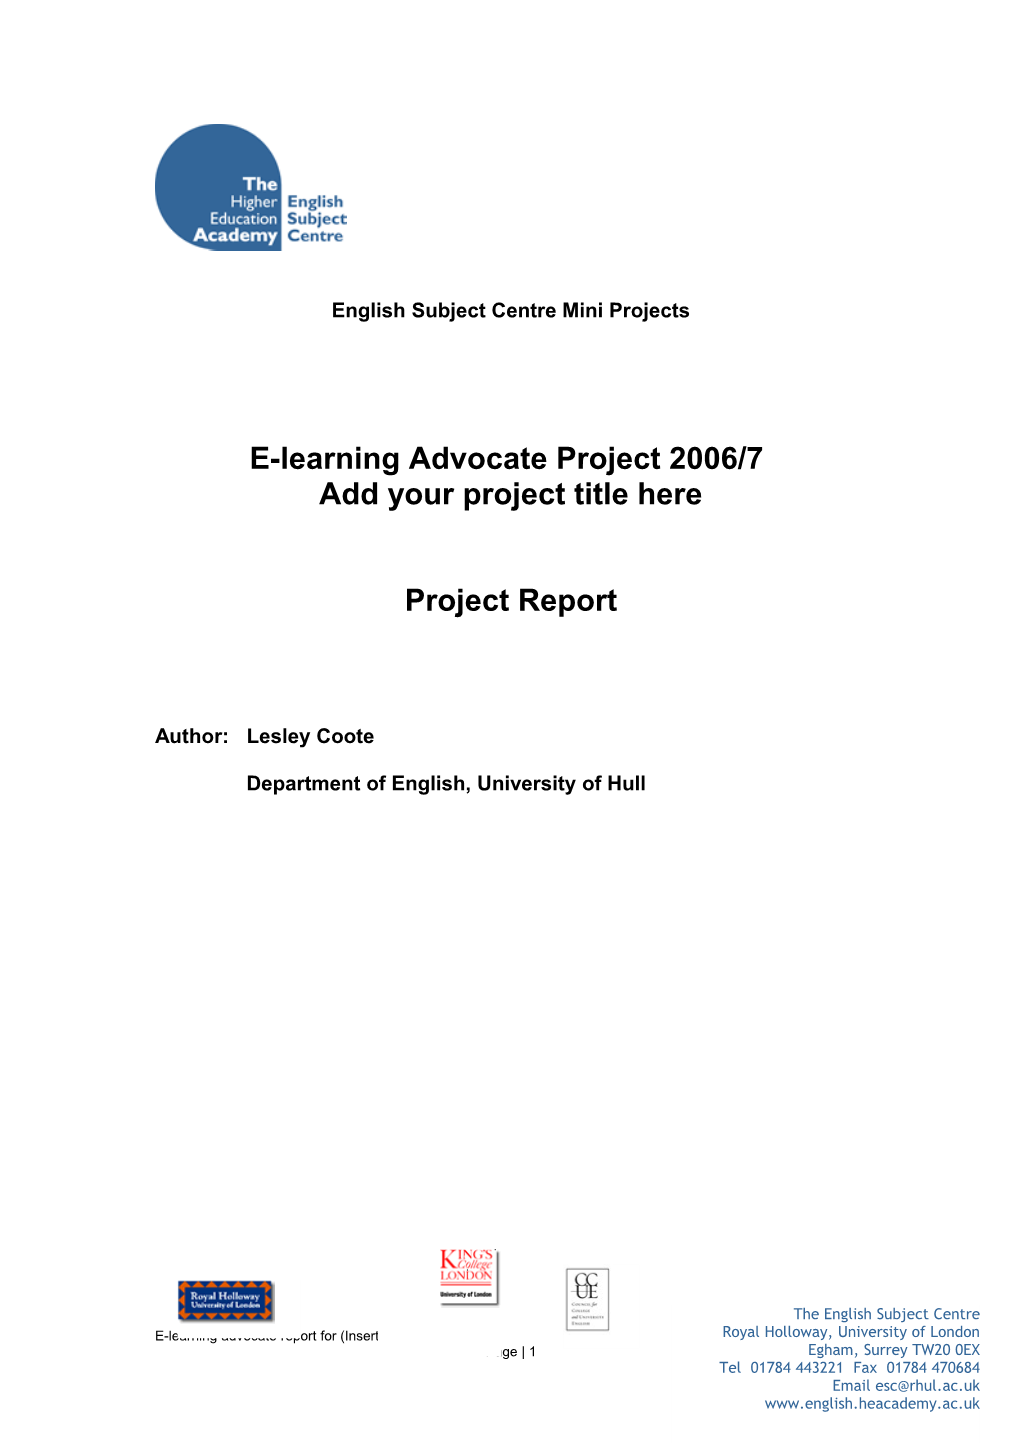 E-Learning Advocate Project Report - University of Hull